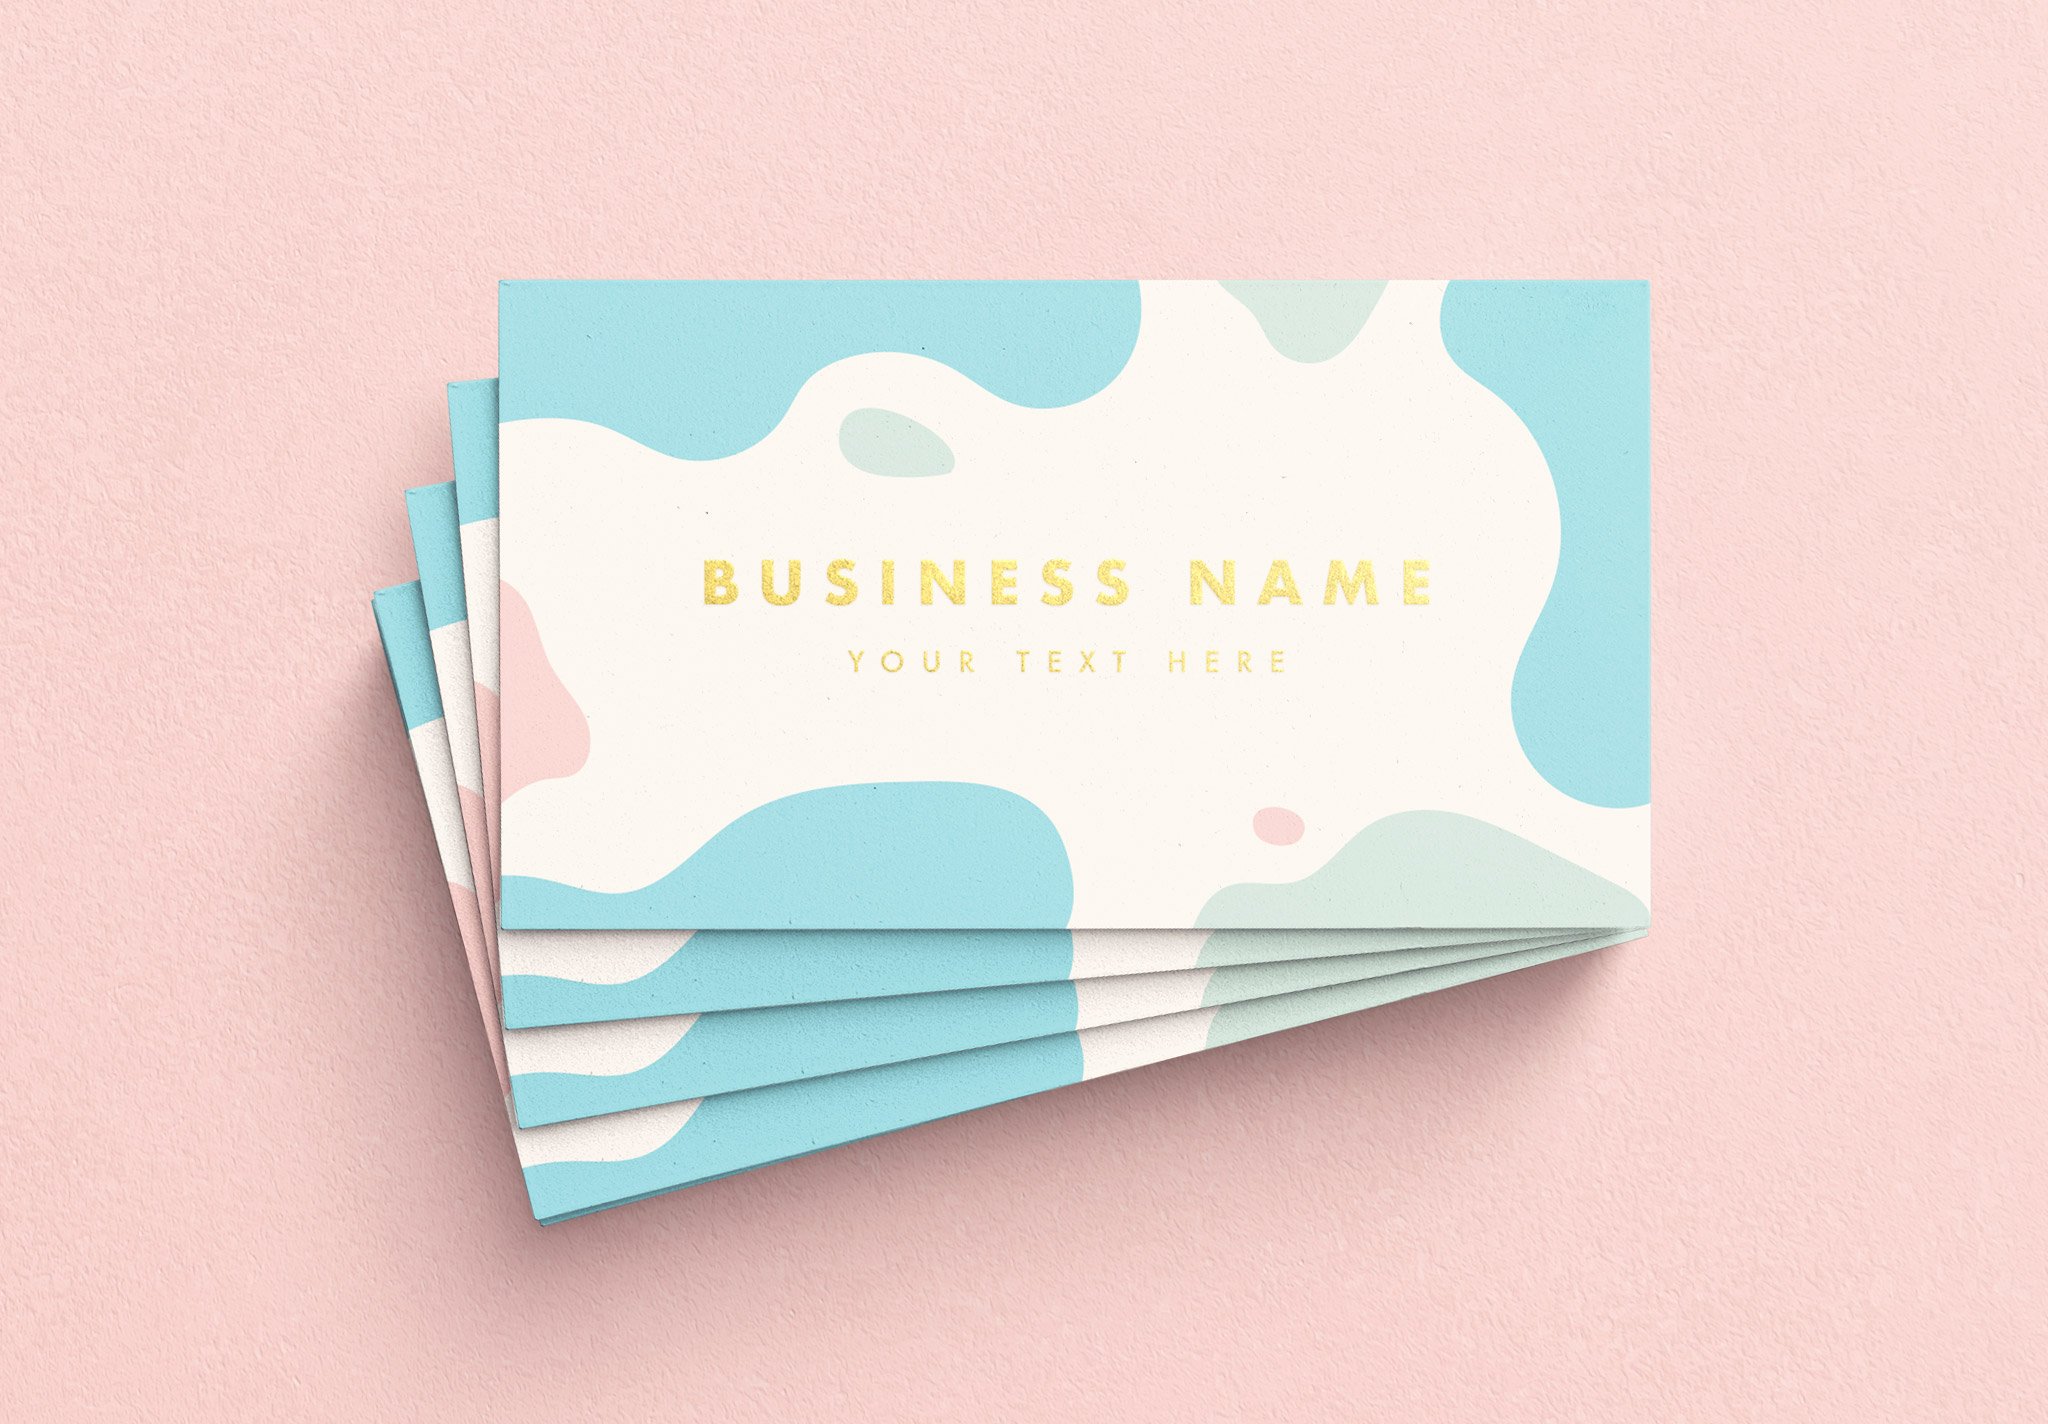 business cards layout 3 image03